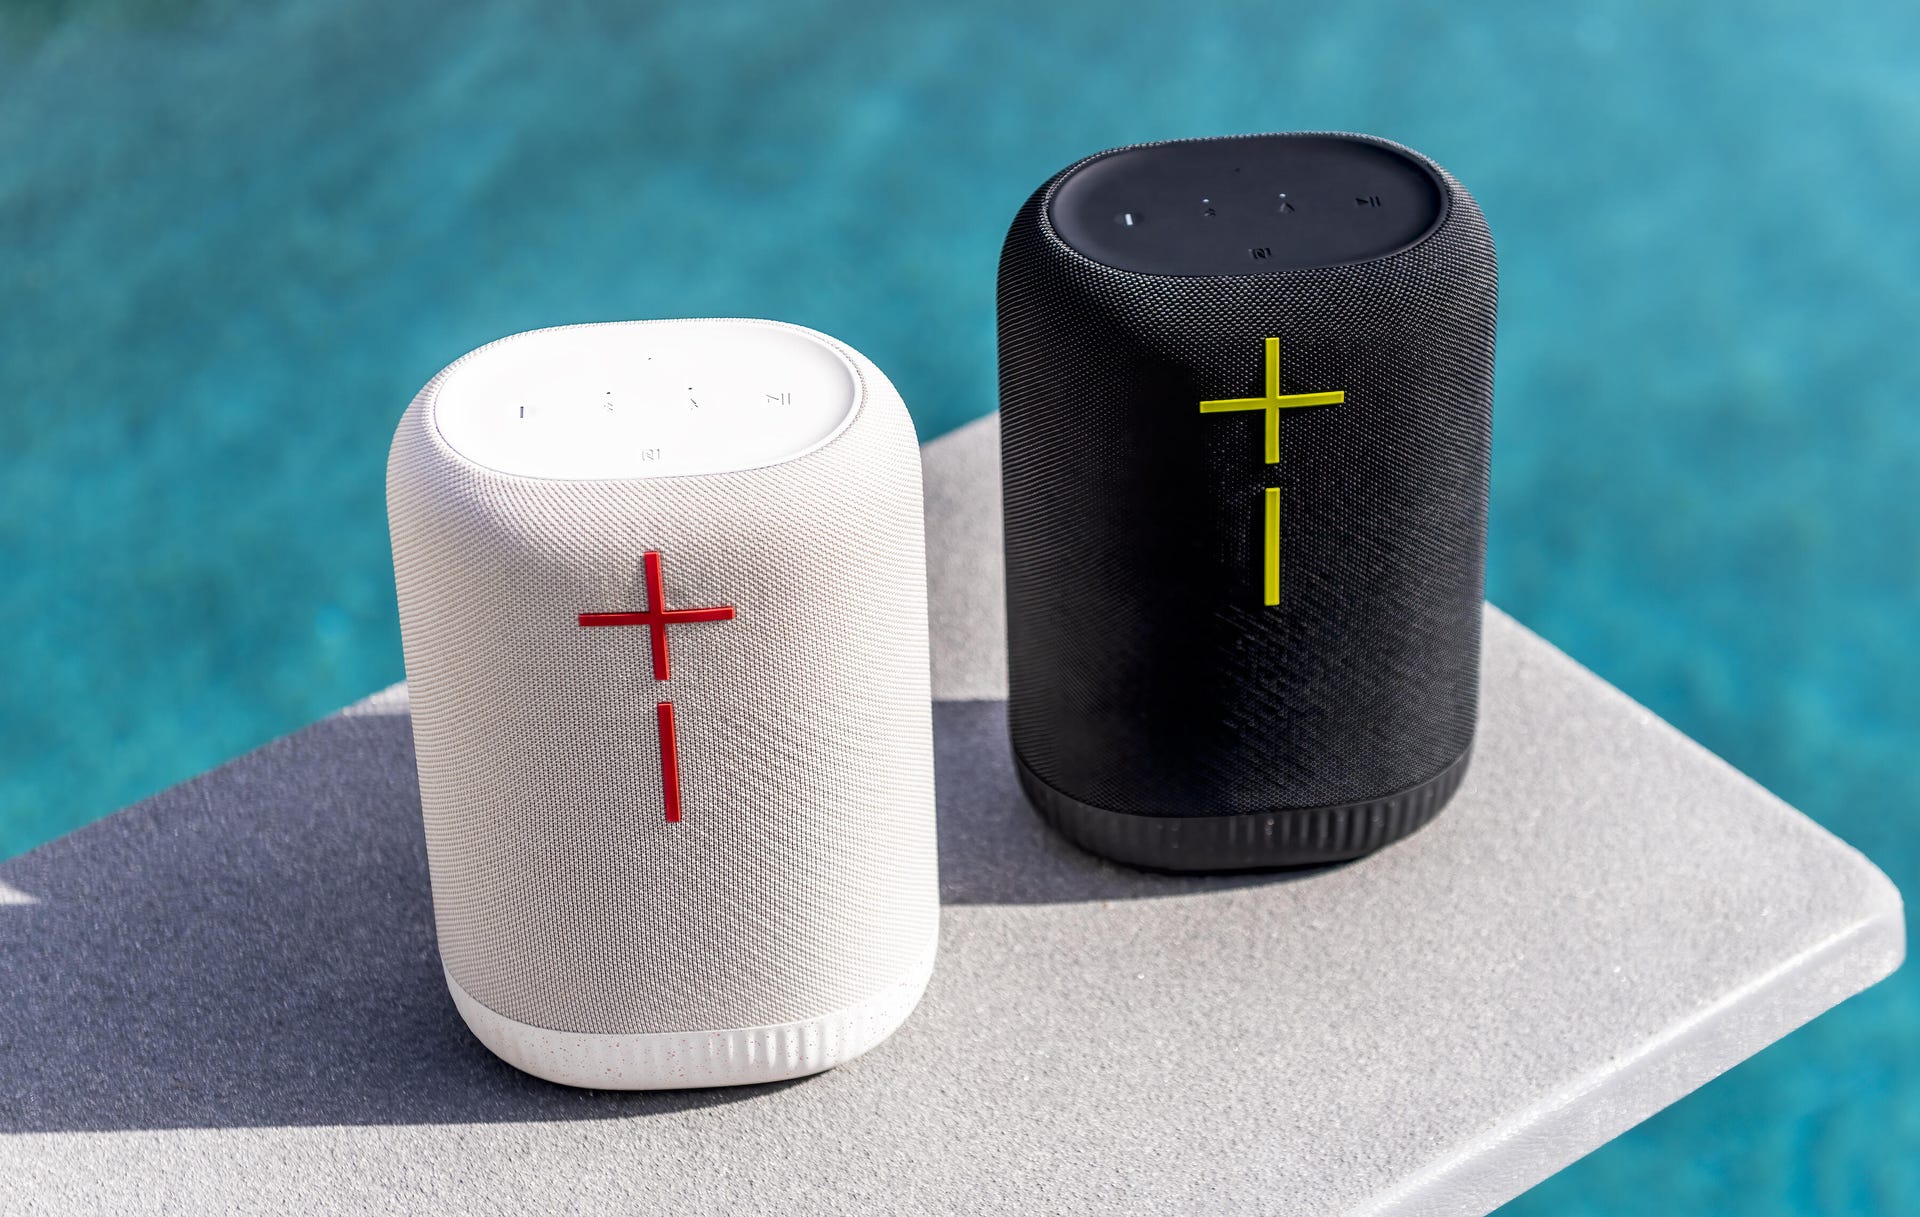 One black and one white UE Epicboom Bluetooth speaker, sitting on a diving board over a swimming pool